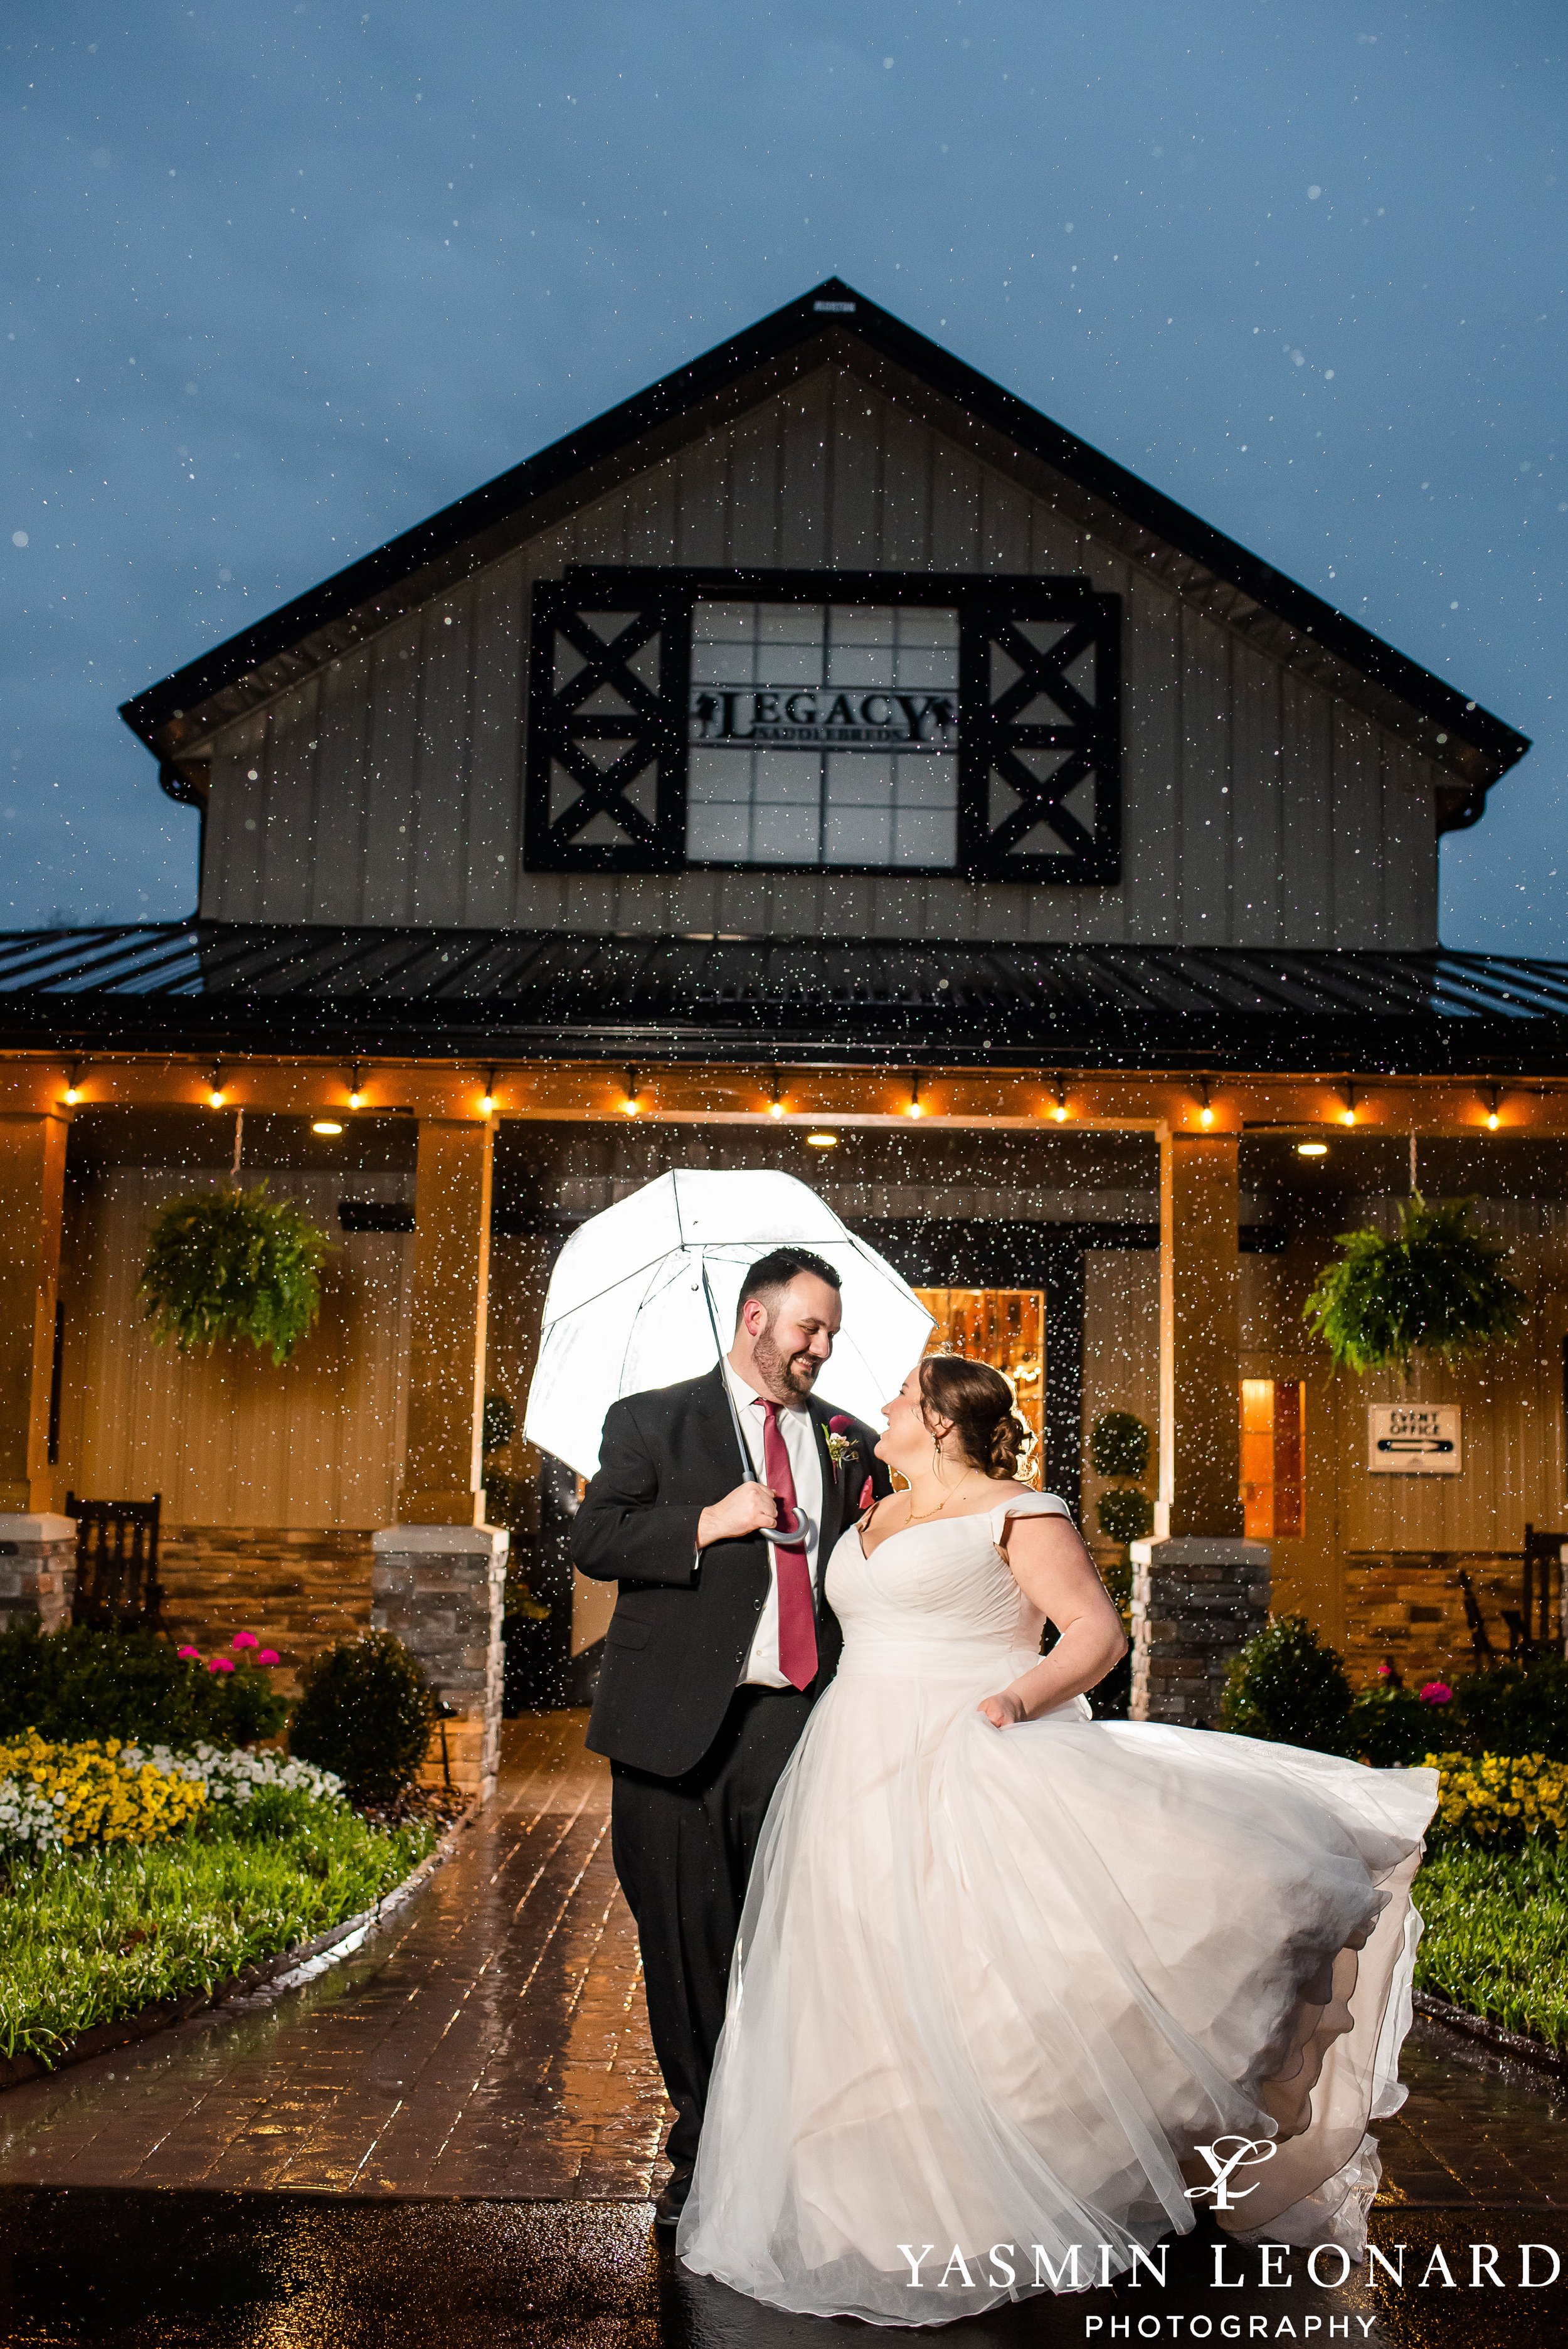 Legacy Stables and Events - Legacy Stables Wedding - Morgan and Logan - NC Weddings - Marry Me NC - Triad Weddings - Best Wedding Photographer Near Me - Best Photographer in High Point - Yasmin Leonard Photography-32.jpg